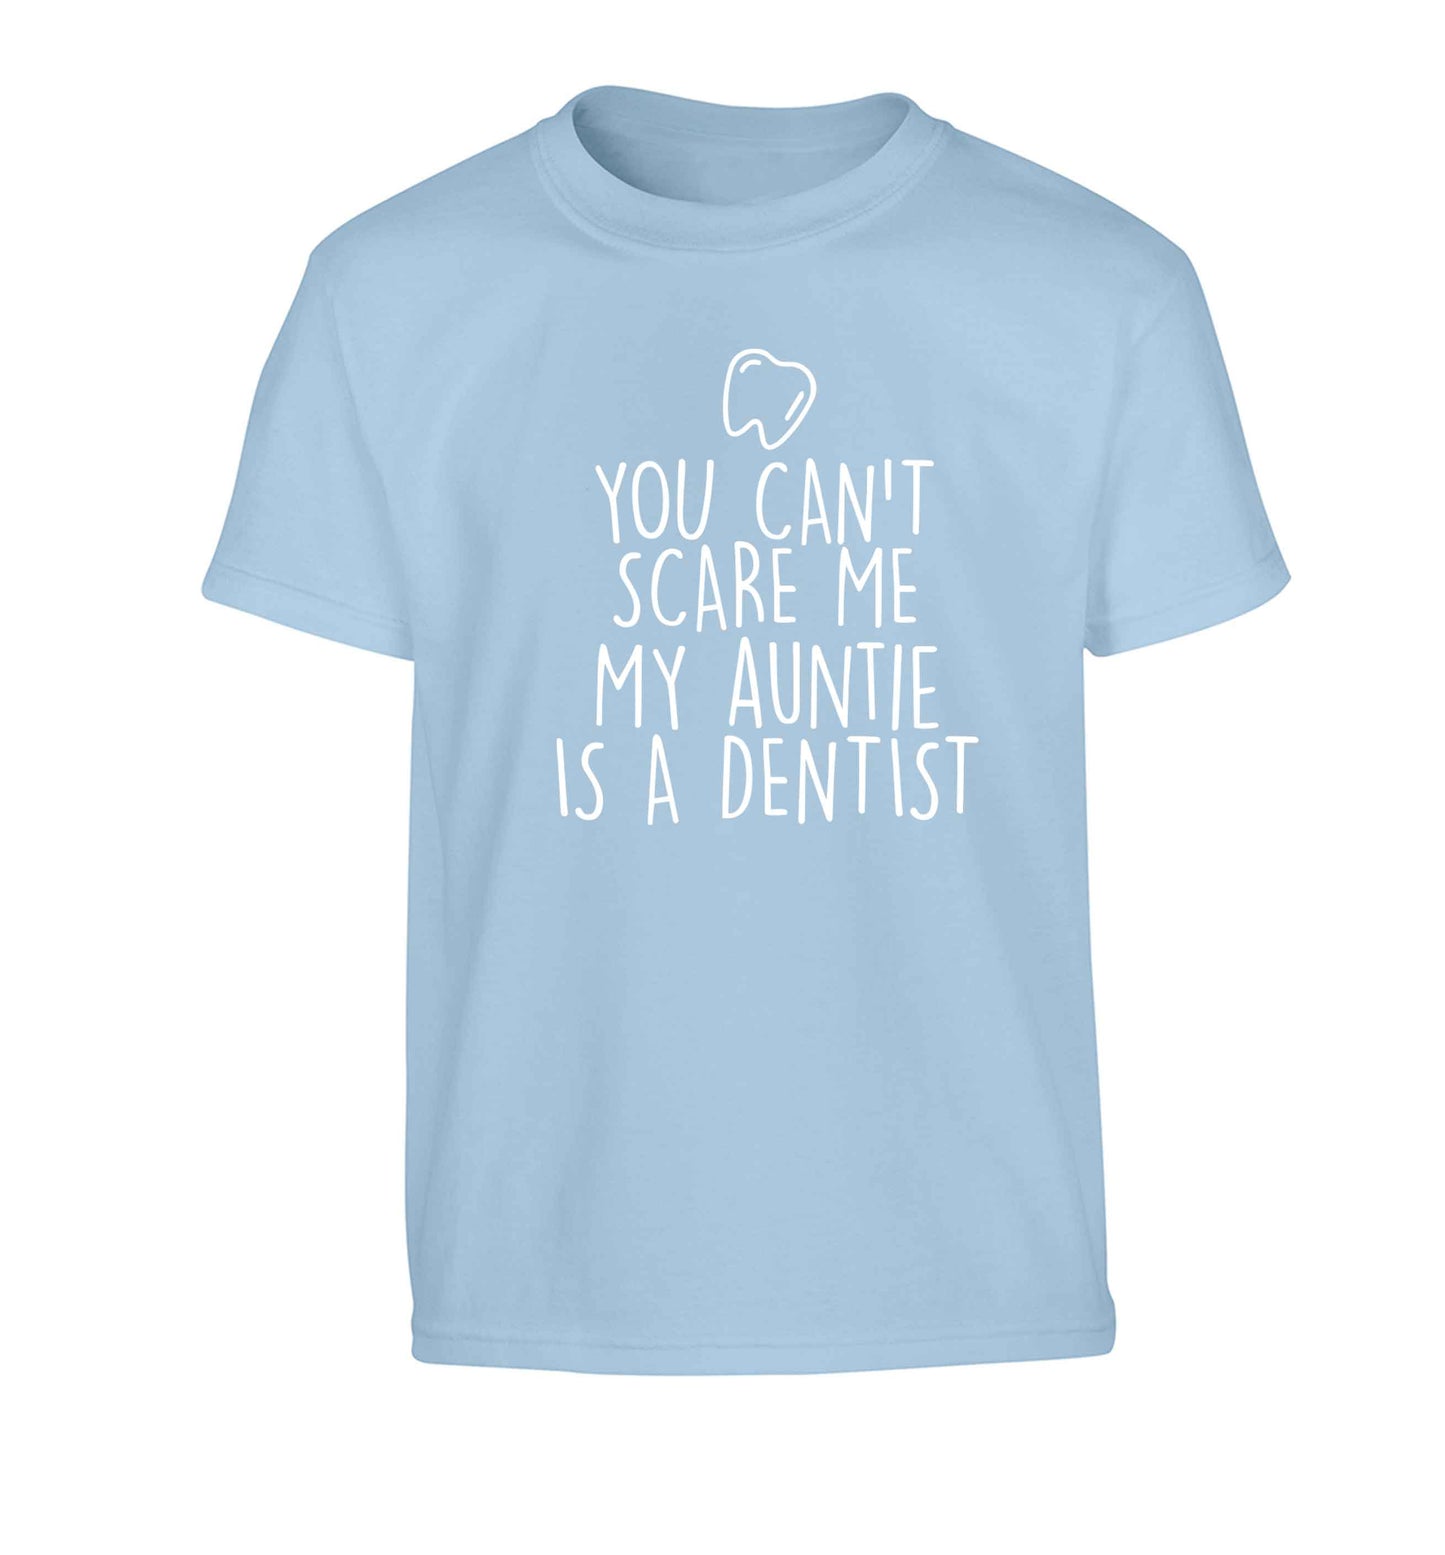 You can't scare me my auntie is a dentist Children's light blue Tshirt 12-13 Years